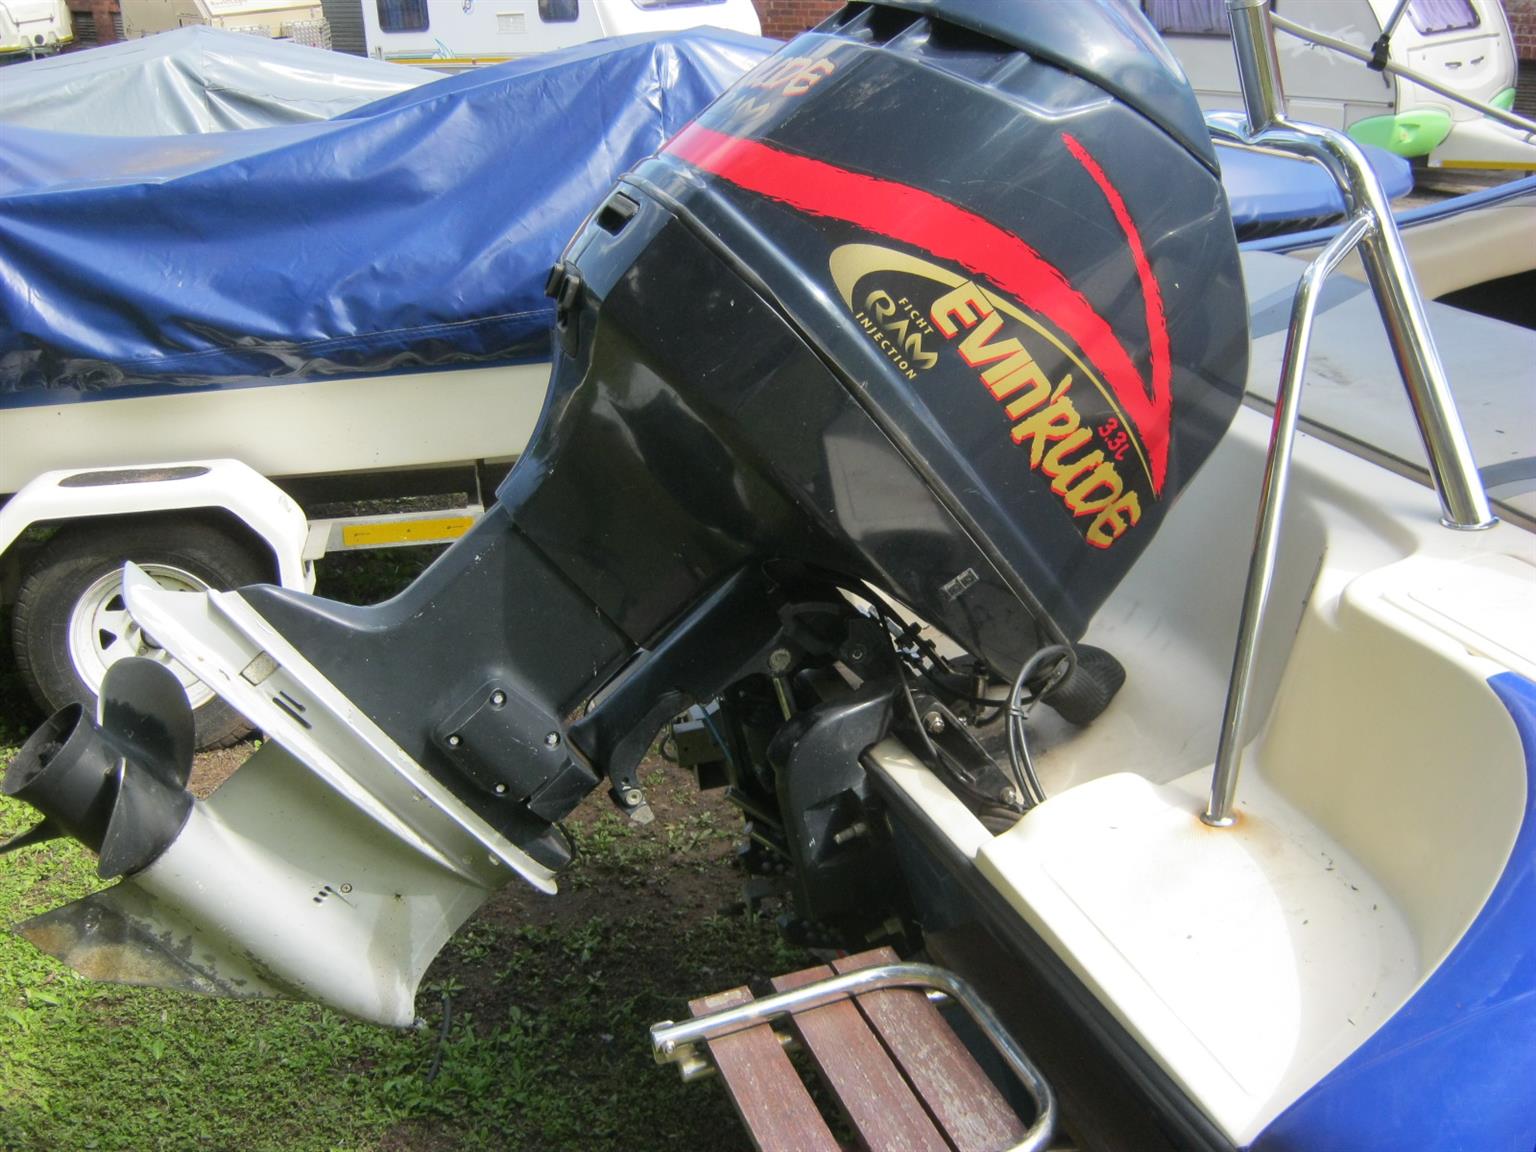 Classic 210 B/R with Evinrude 225HP (Ficht) Motor